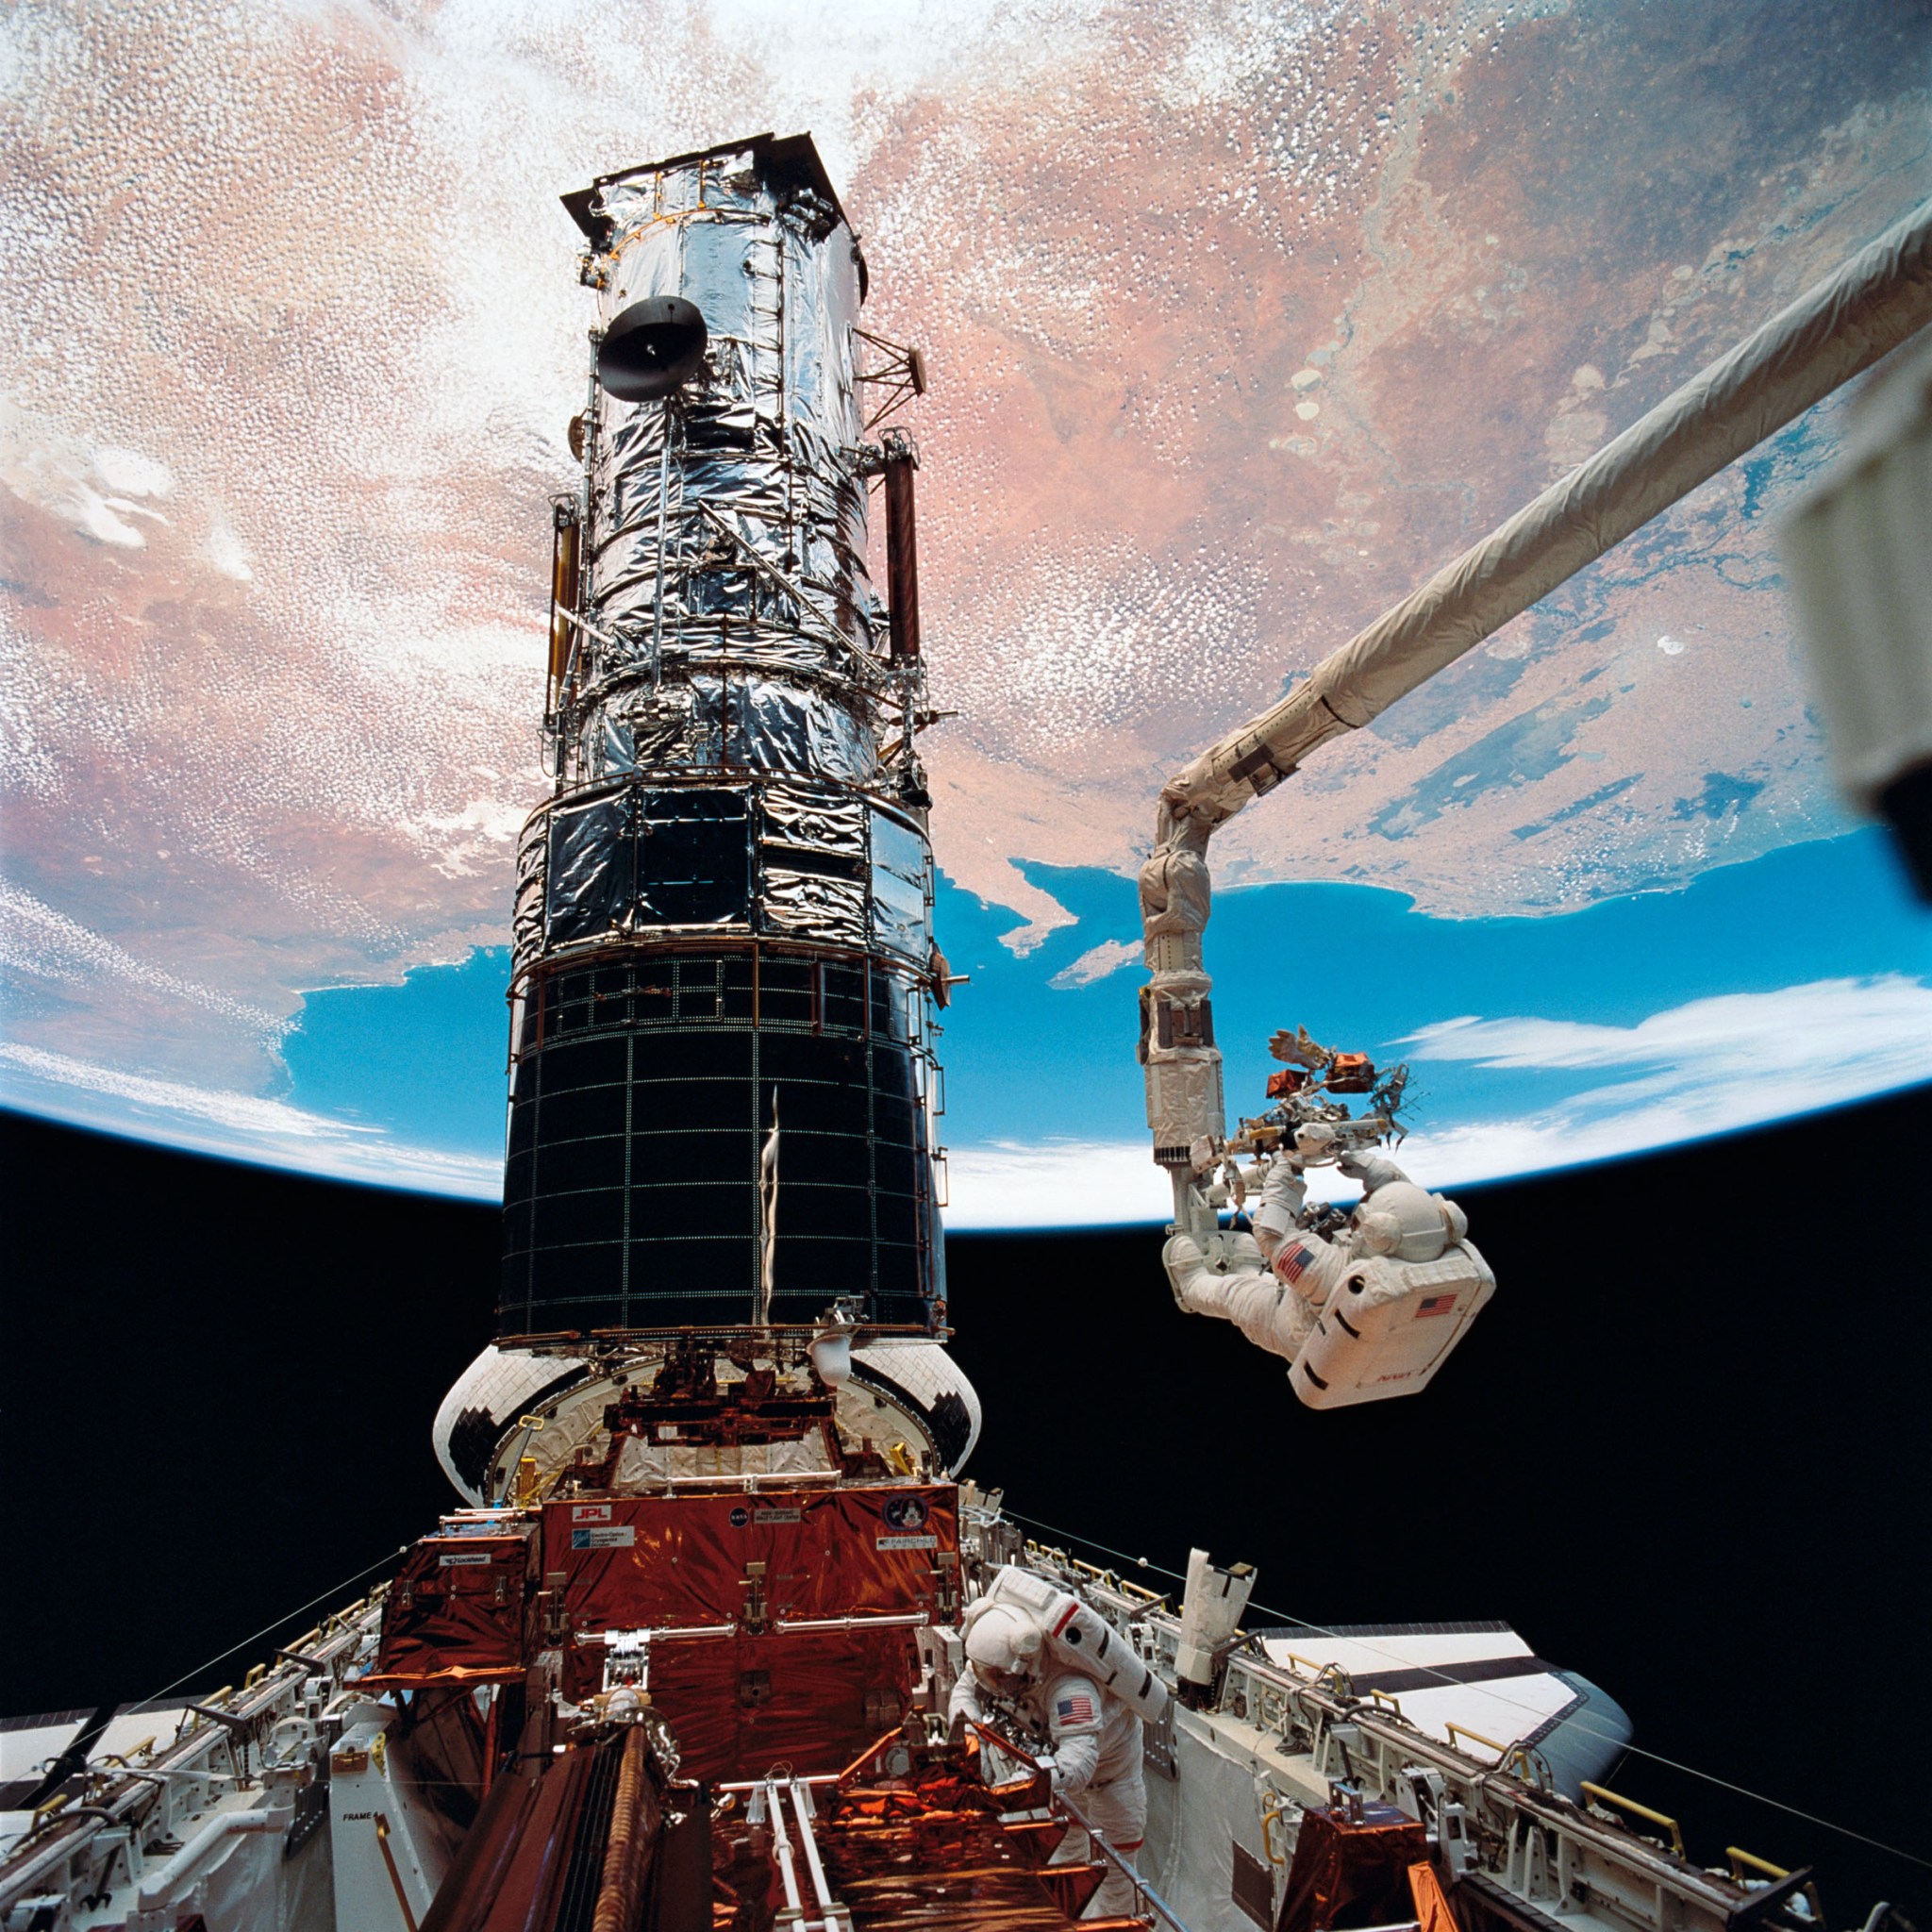 Hubble Space Telescope during SM1